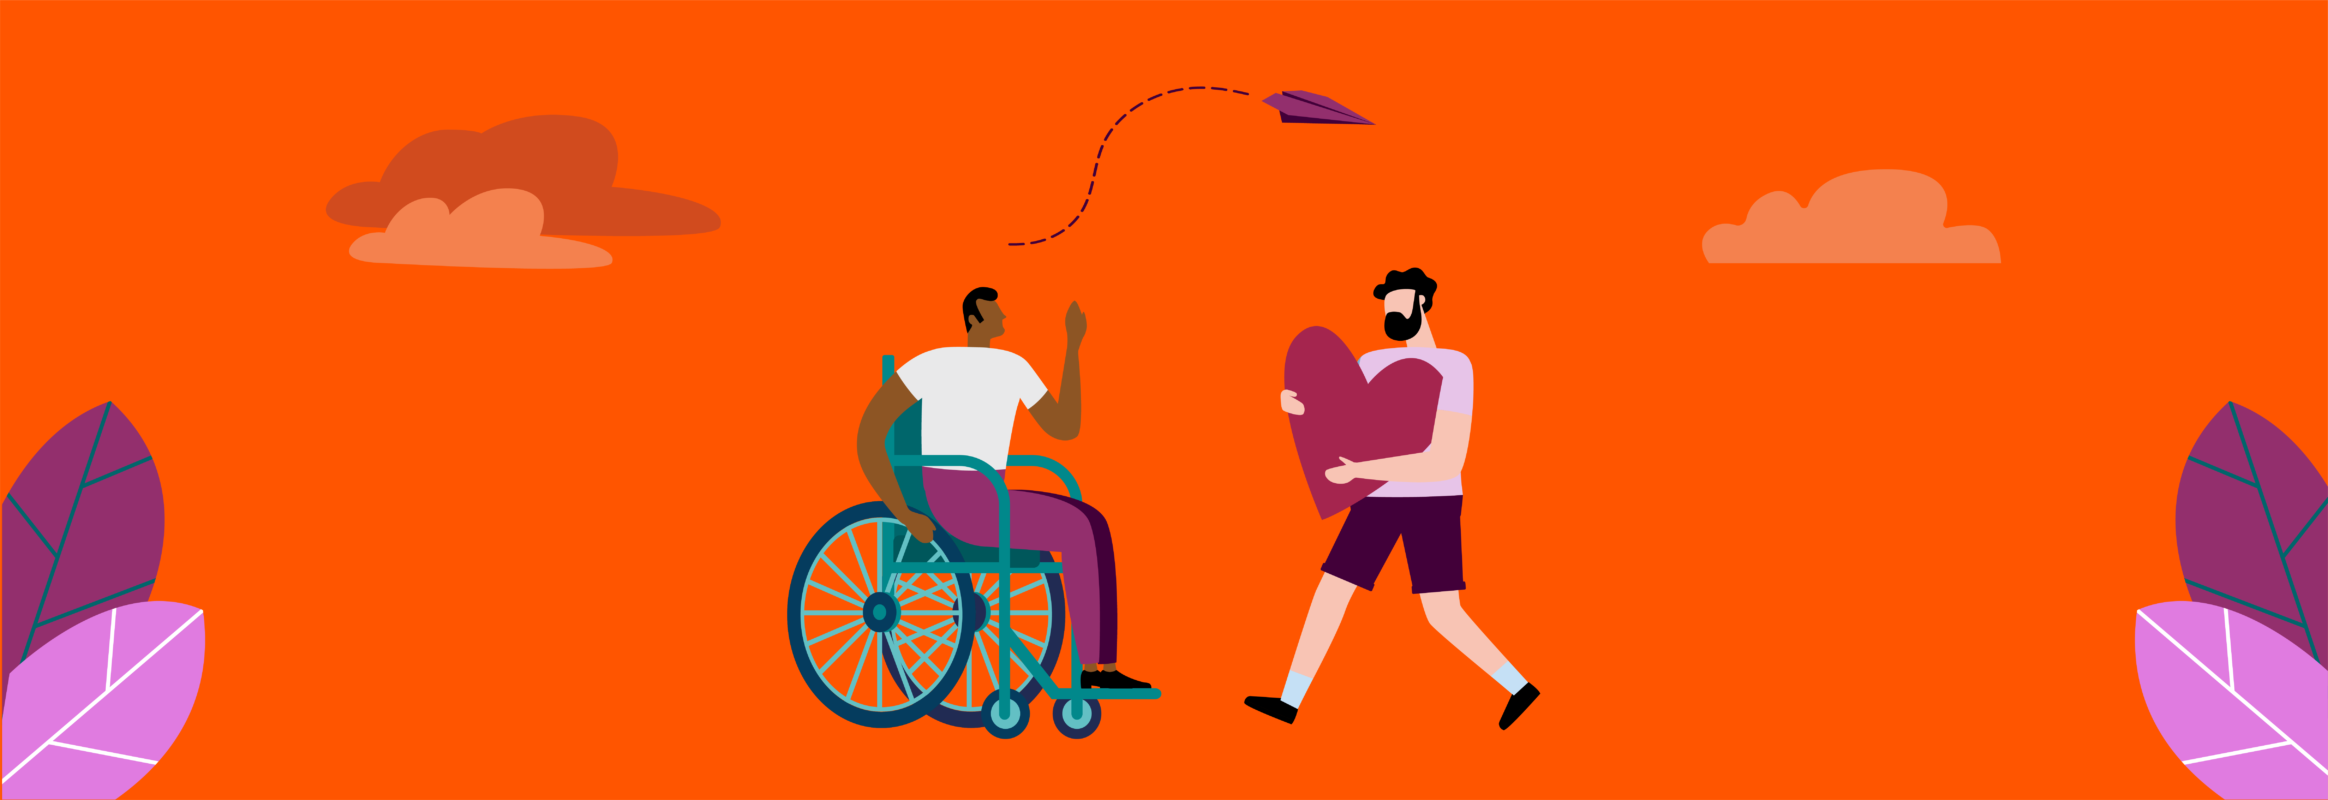 Illustration with one person in a wheelchair and another one standing holding a big heart symbol, facing each other.